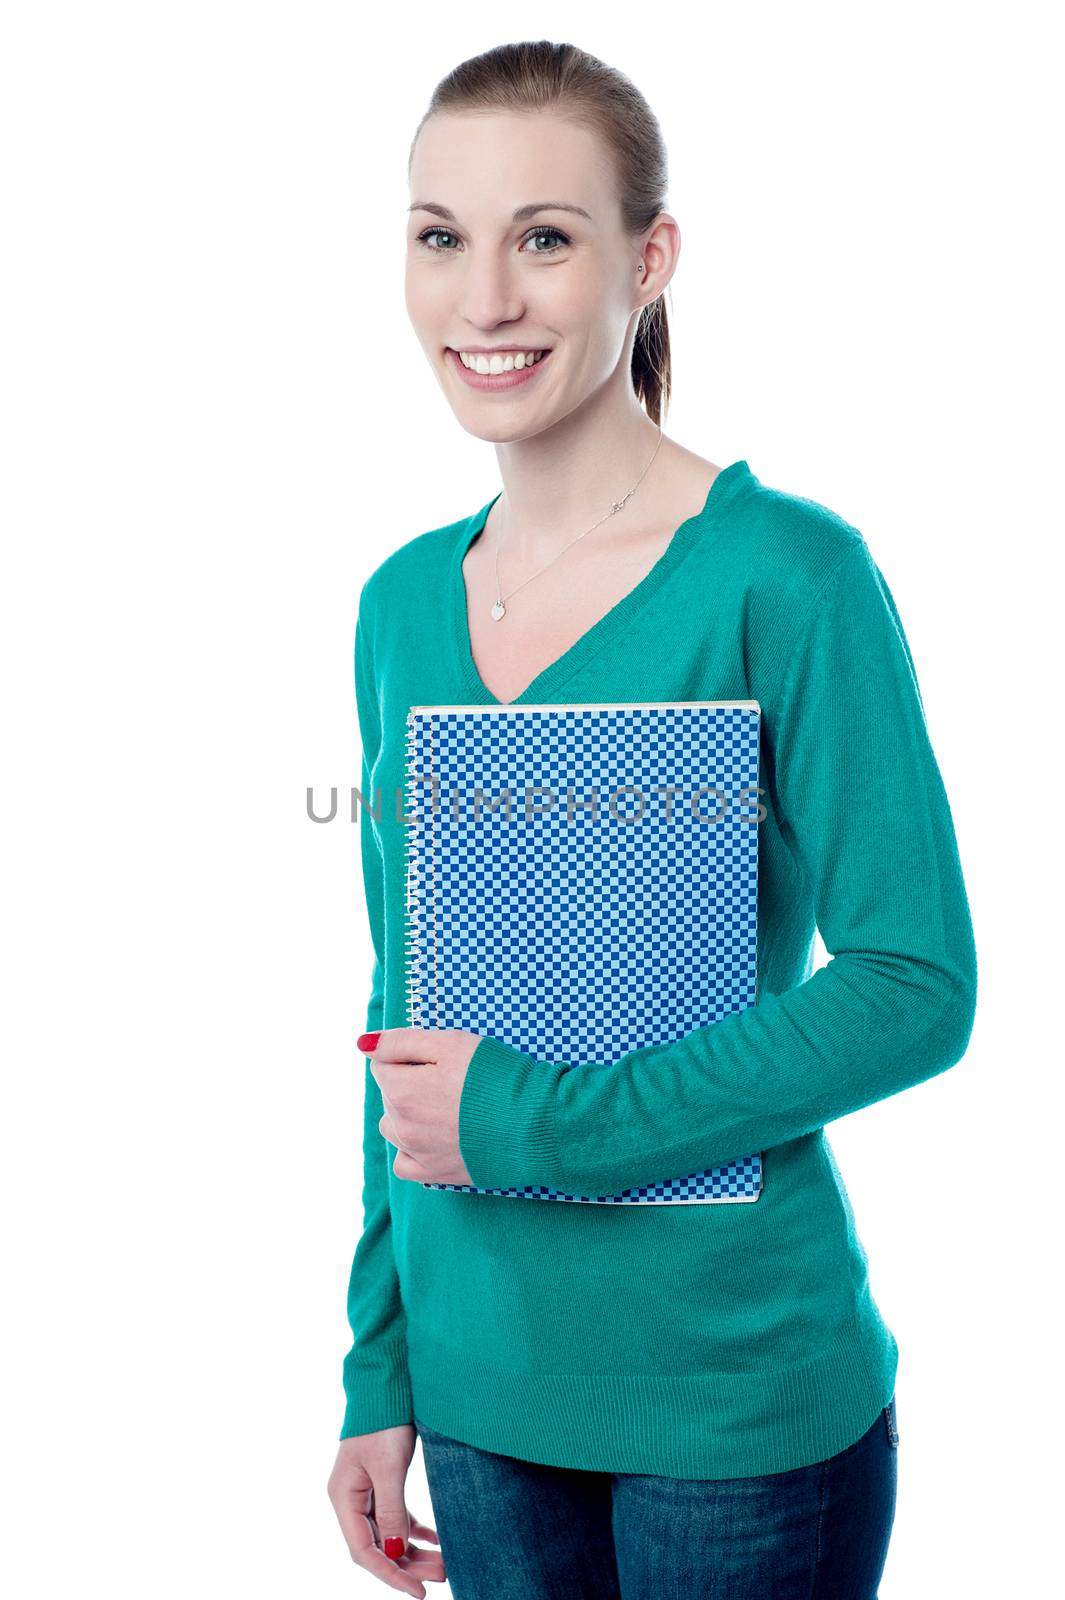 Young college student posing with notebook